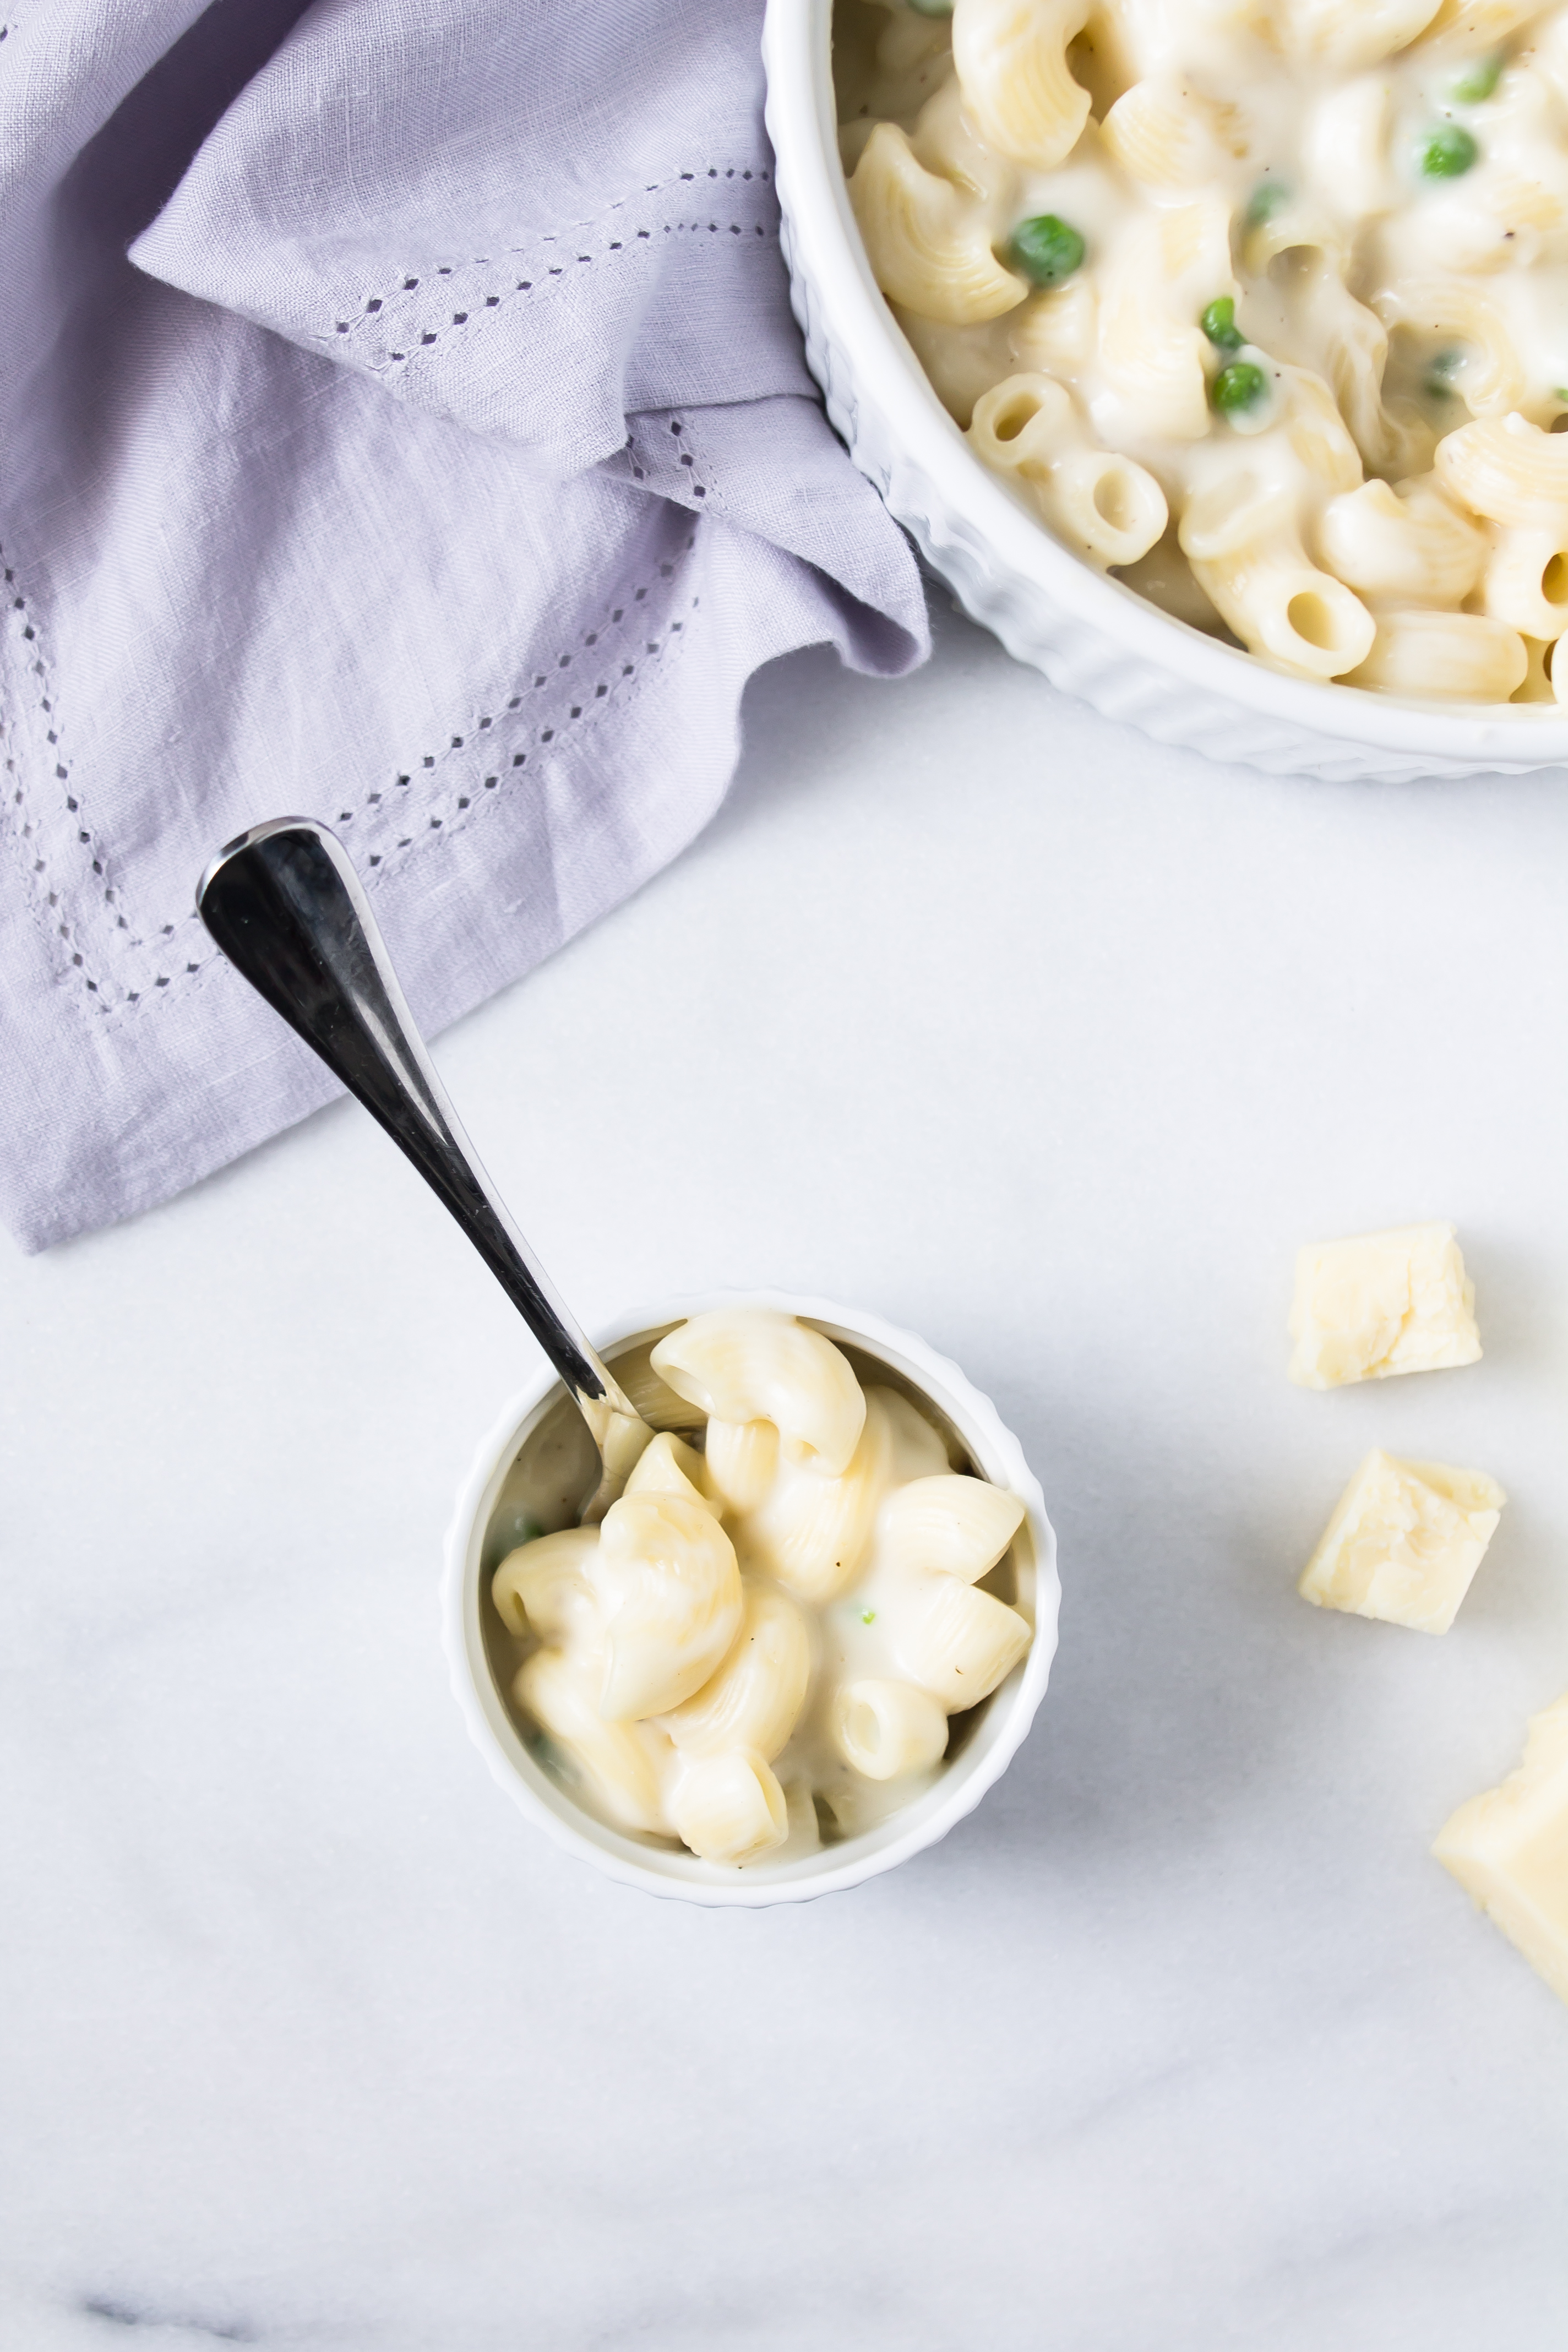 Foodie blogger Lexi of Glitter, Inc. shares how to make the most amazing goat cheese macaroni and cheese with peas. Click through for the recipe. | glitterinc.com | @glitterinc